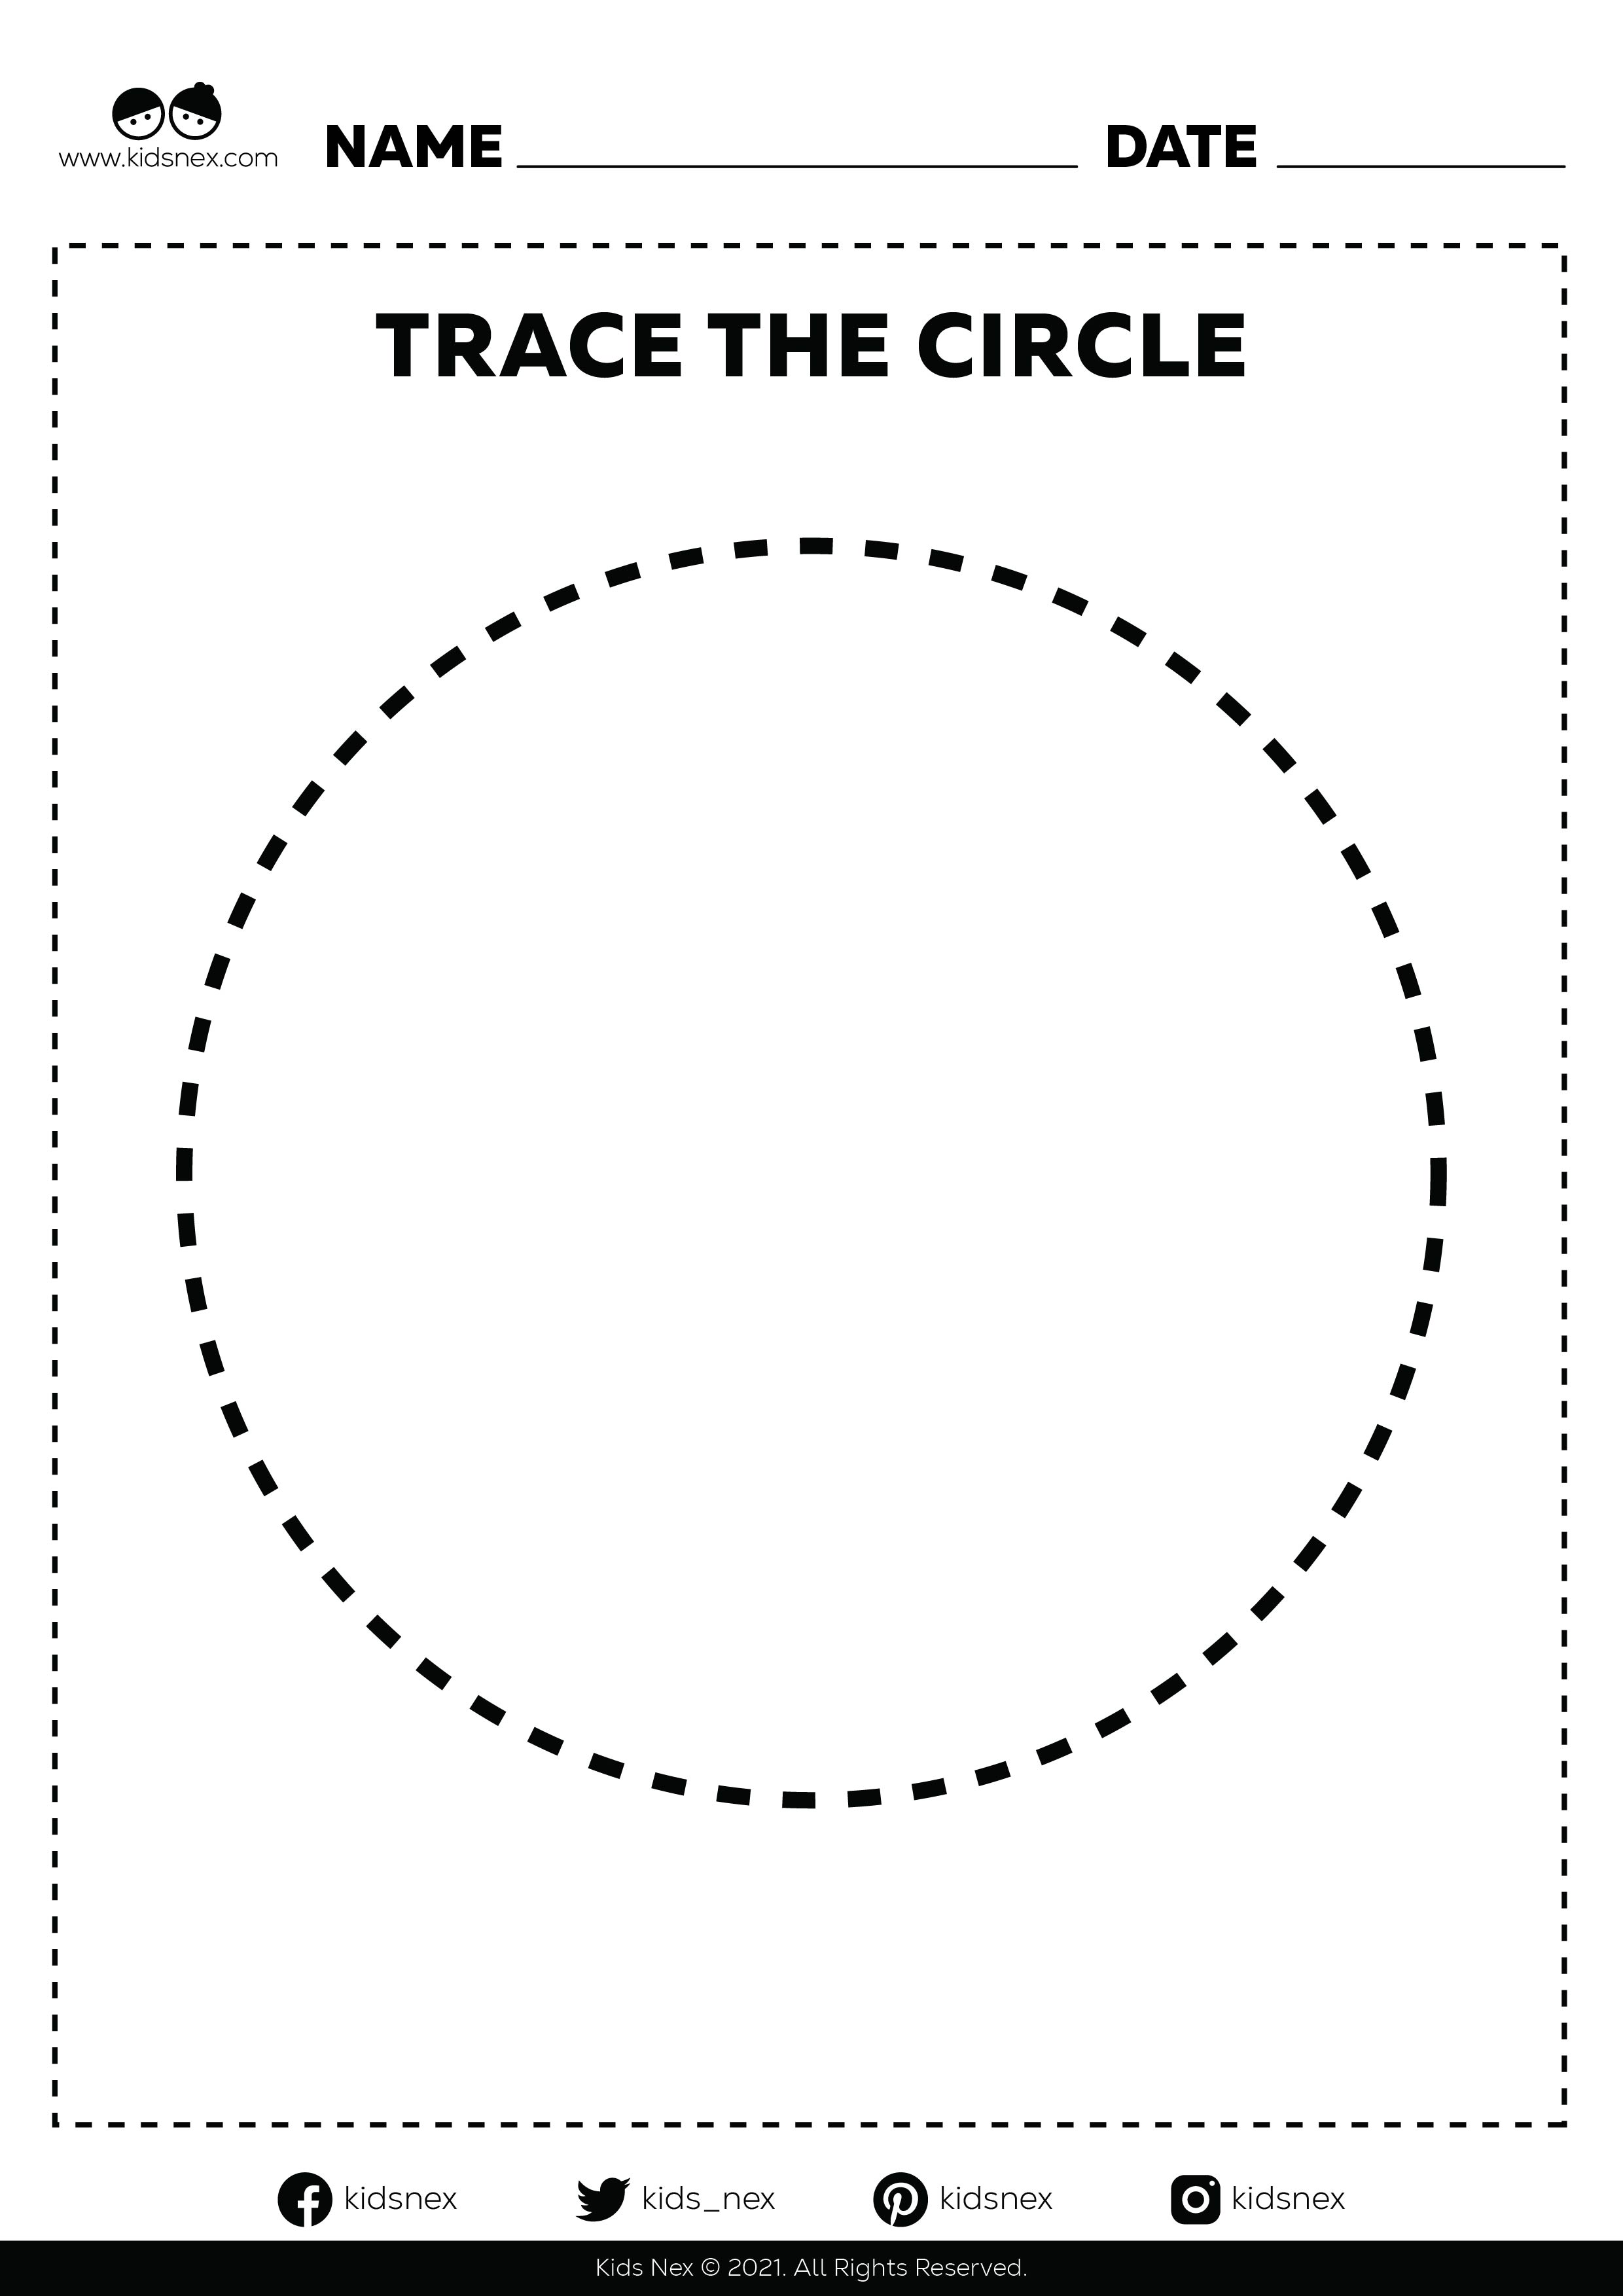 Trace the Circle Worksheet